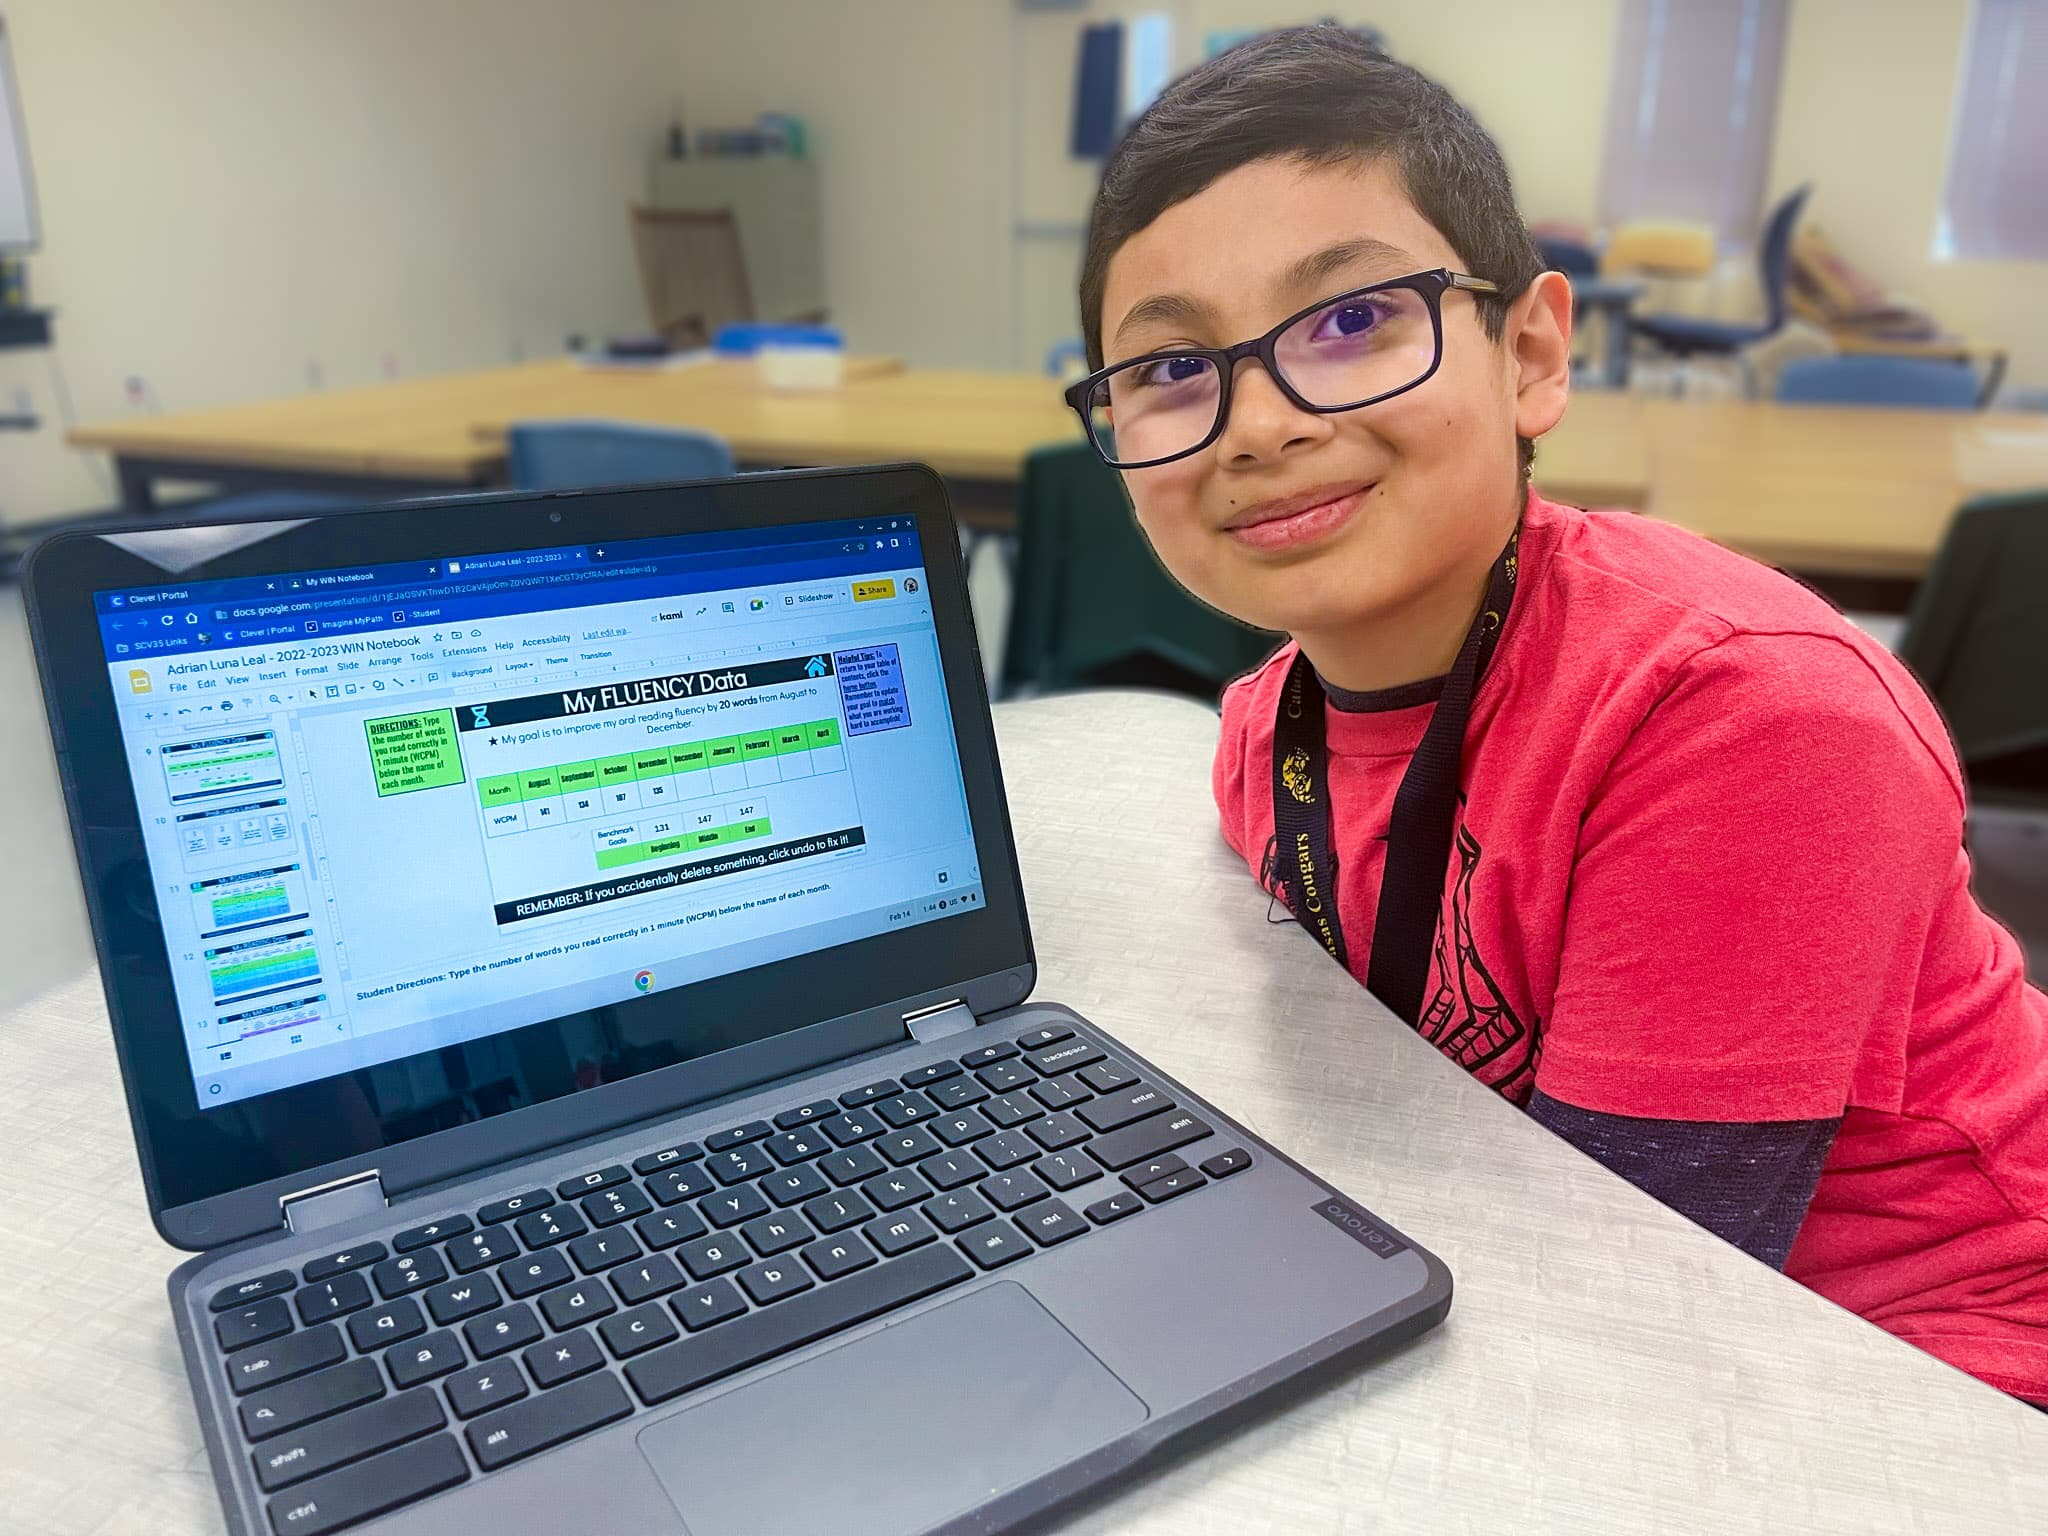 child smiling at the camera, next to a laptop